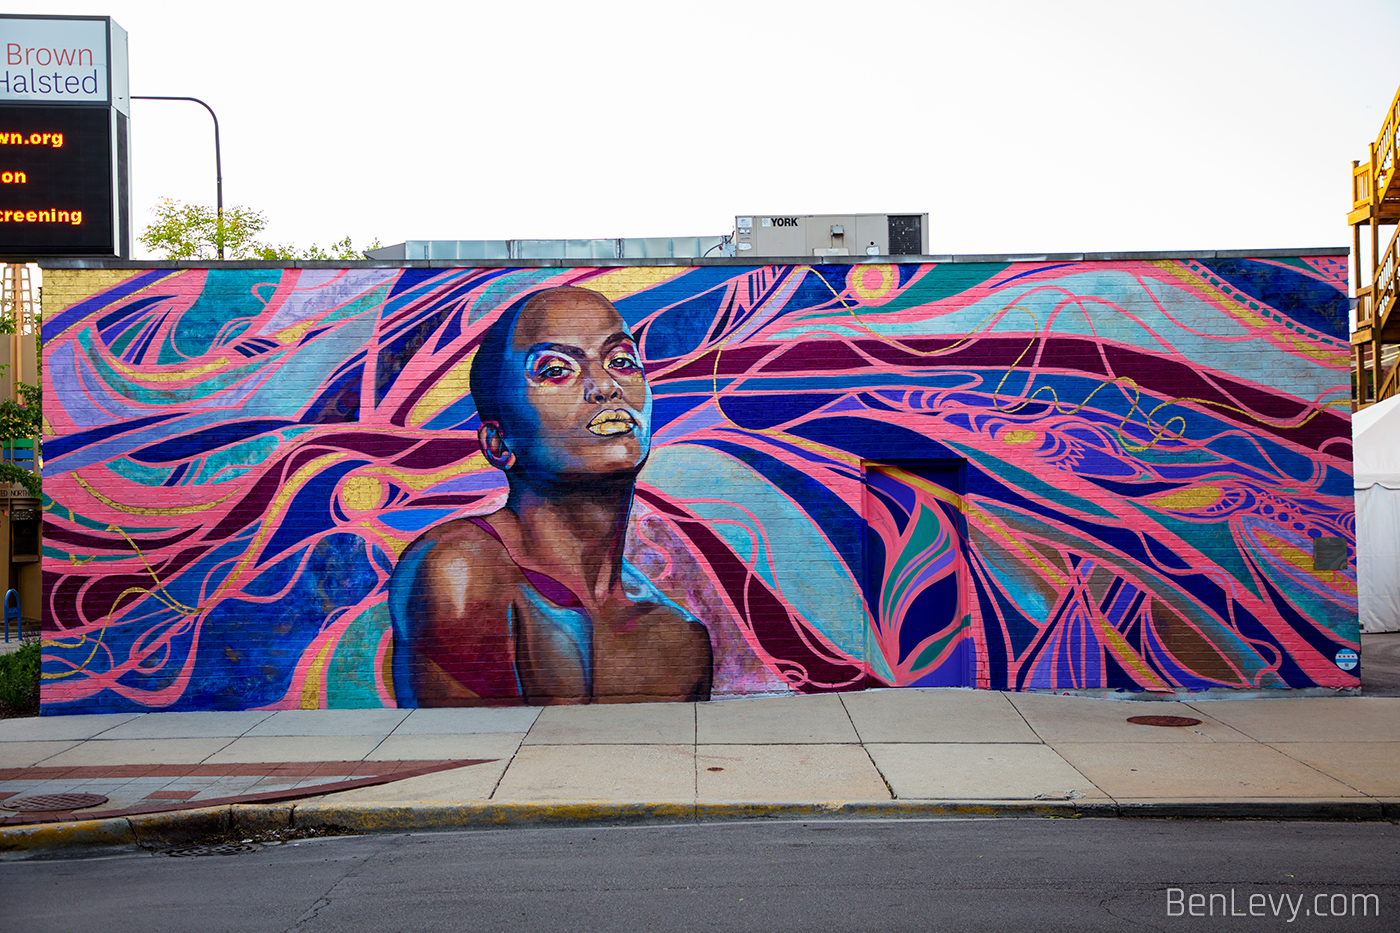 “The Love That I Vibrate”, Queer Mural in Boystown